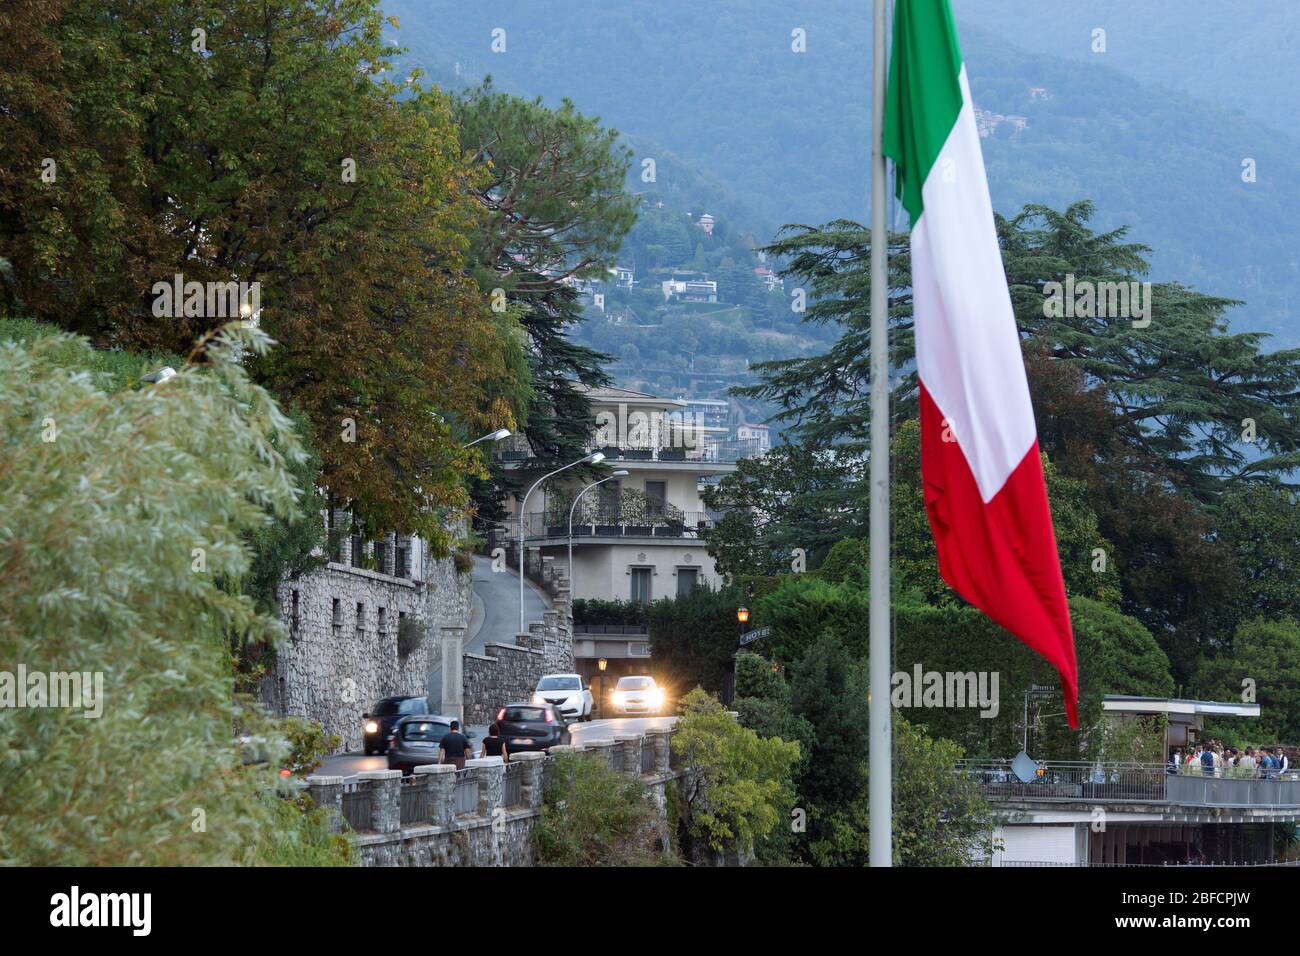 Como, Italy - Sep. 29, 2019 - view to the traffic and village around lake Como. Italian flag at foreground. Stock Photo